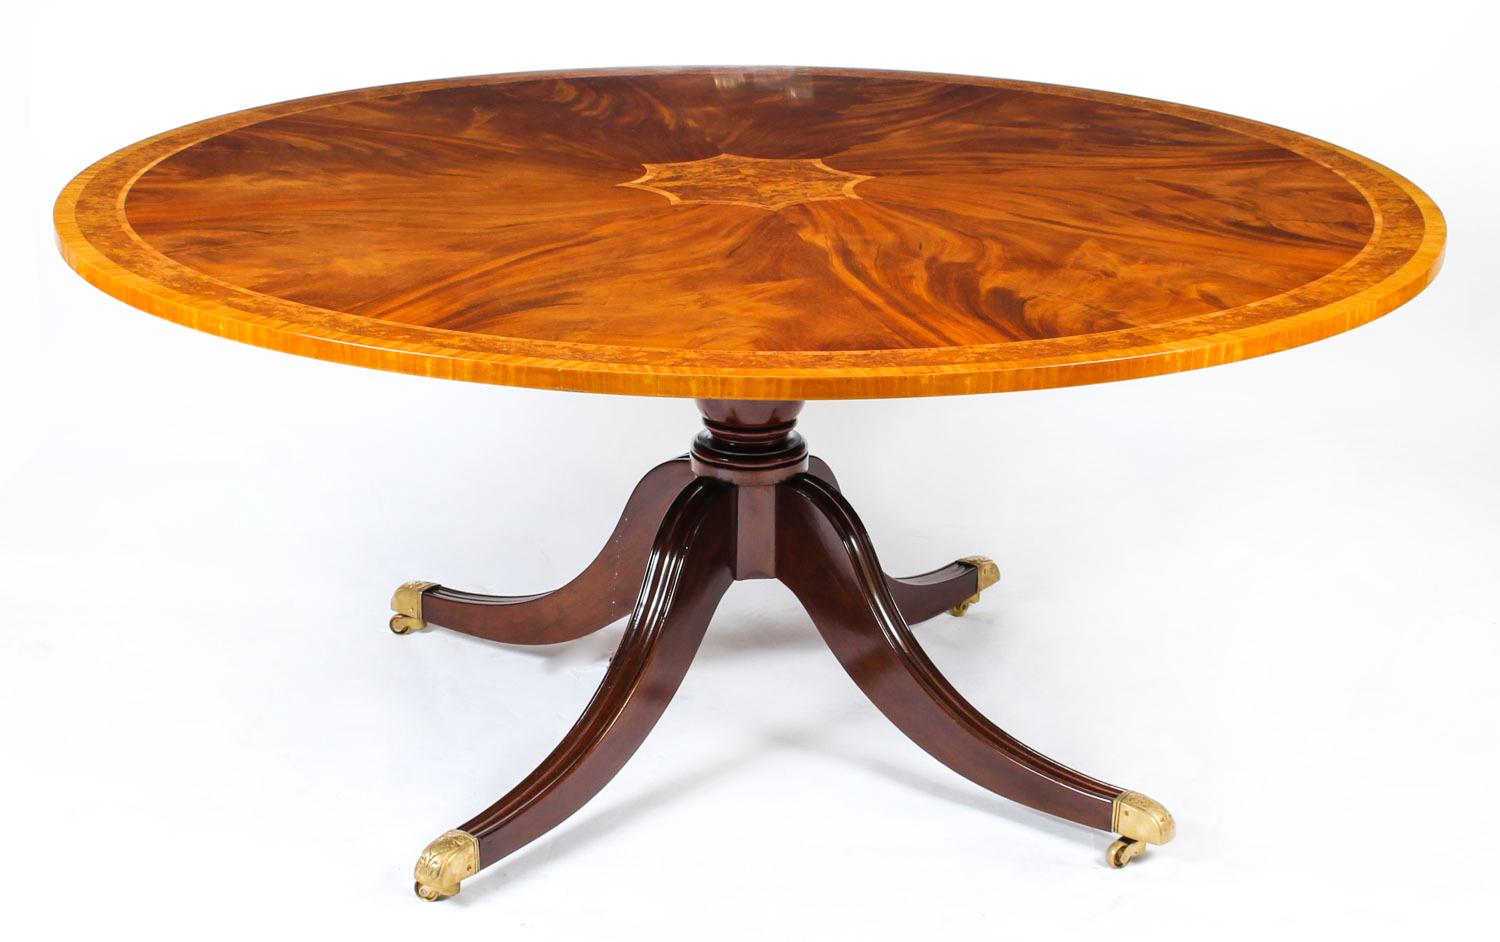 This is a magnificent dining suite comprising an English flame mahogany Regency Revival dining table dating from the mid-20th century and a matching set of eight dining chairs. Measures: 5ft 6